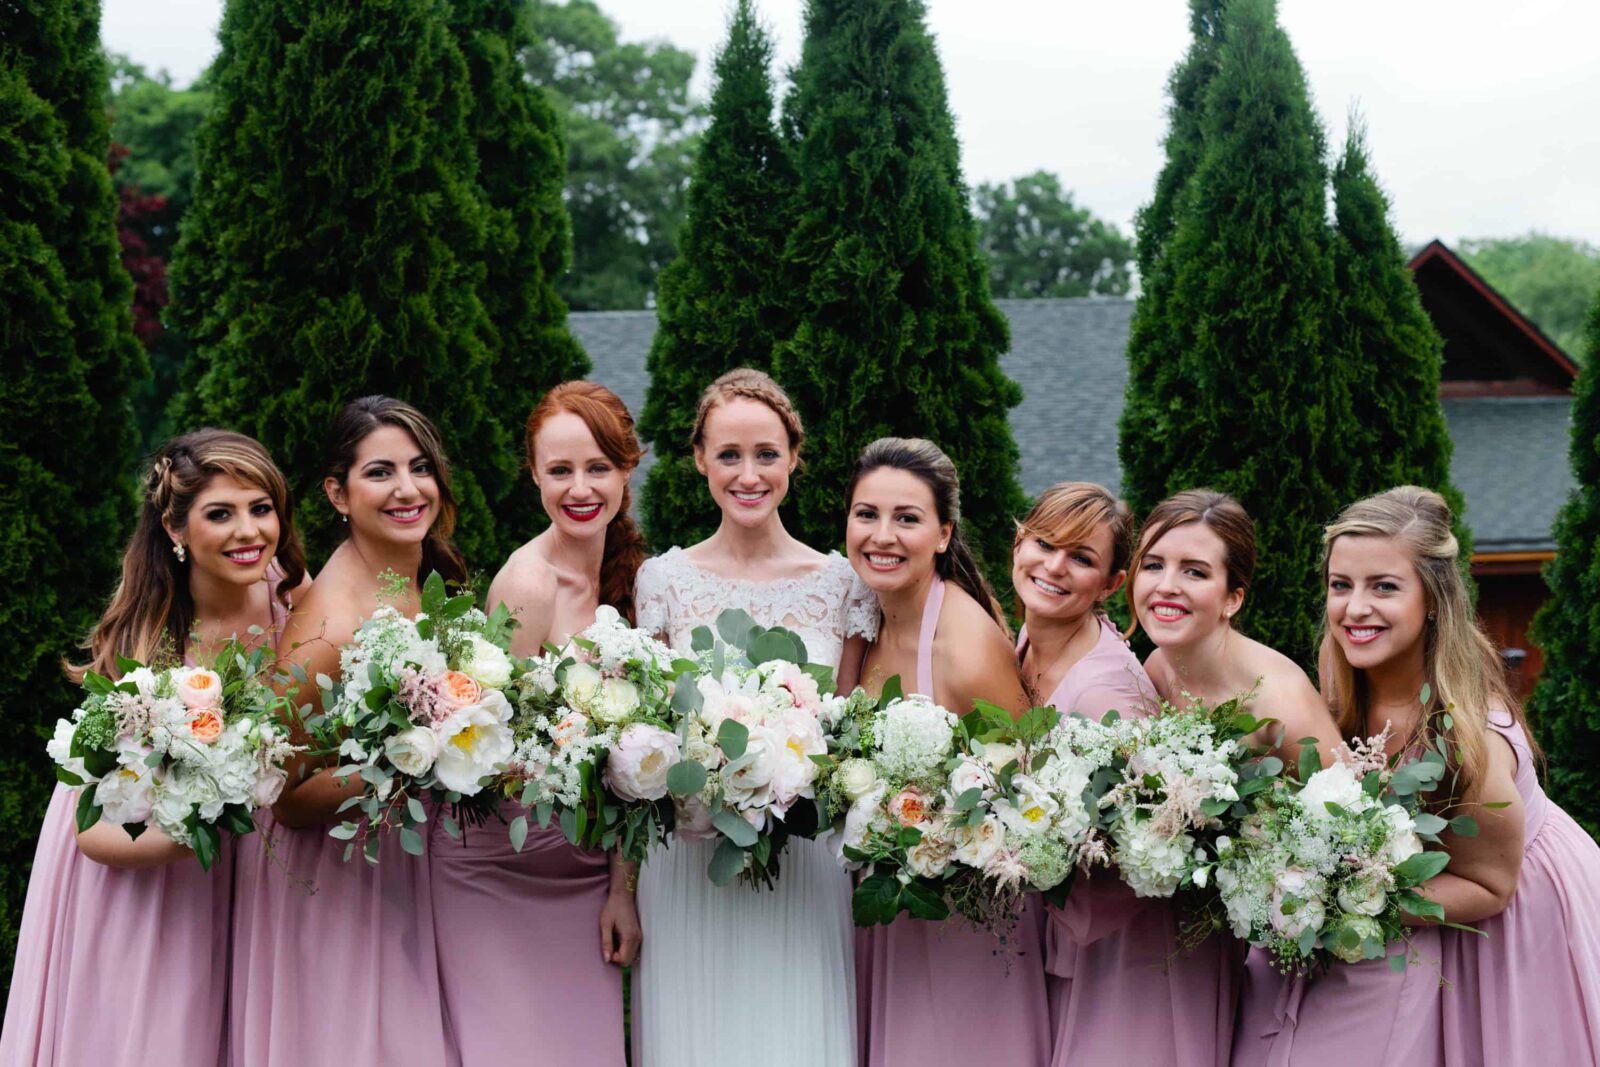 Viral Facebook Group Post: Bride Shames Bridesmaid for Dying Her Hair Red 